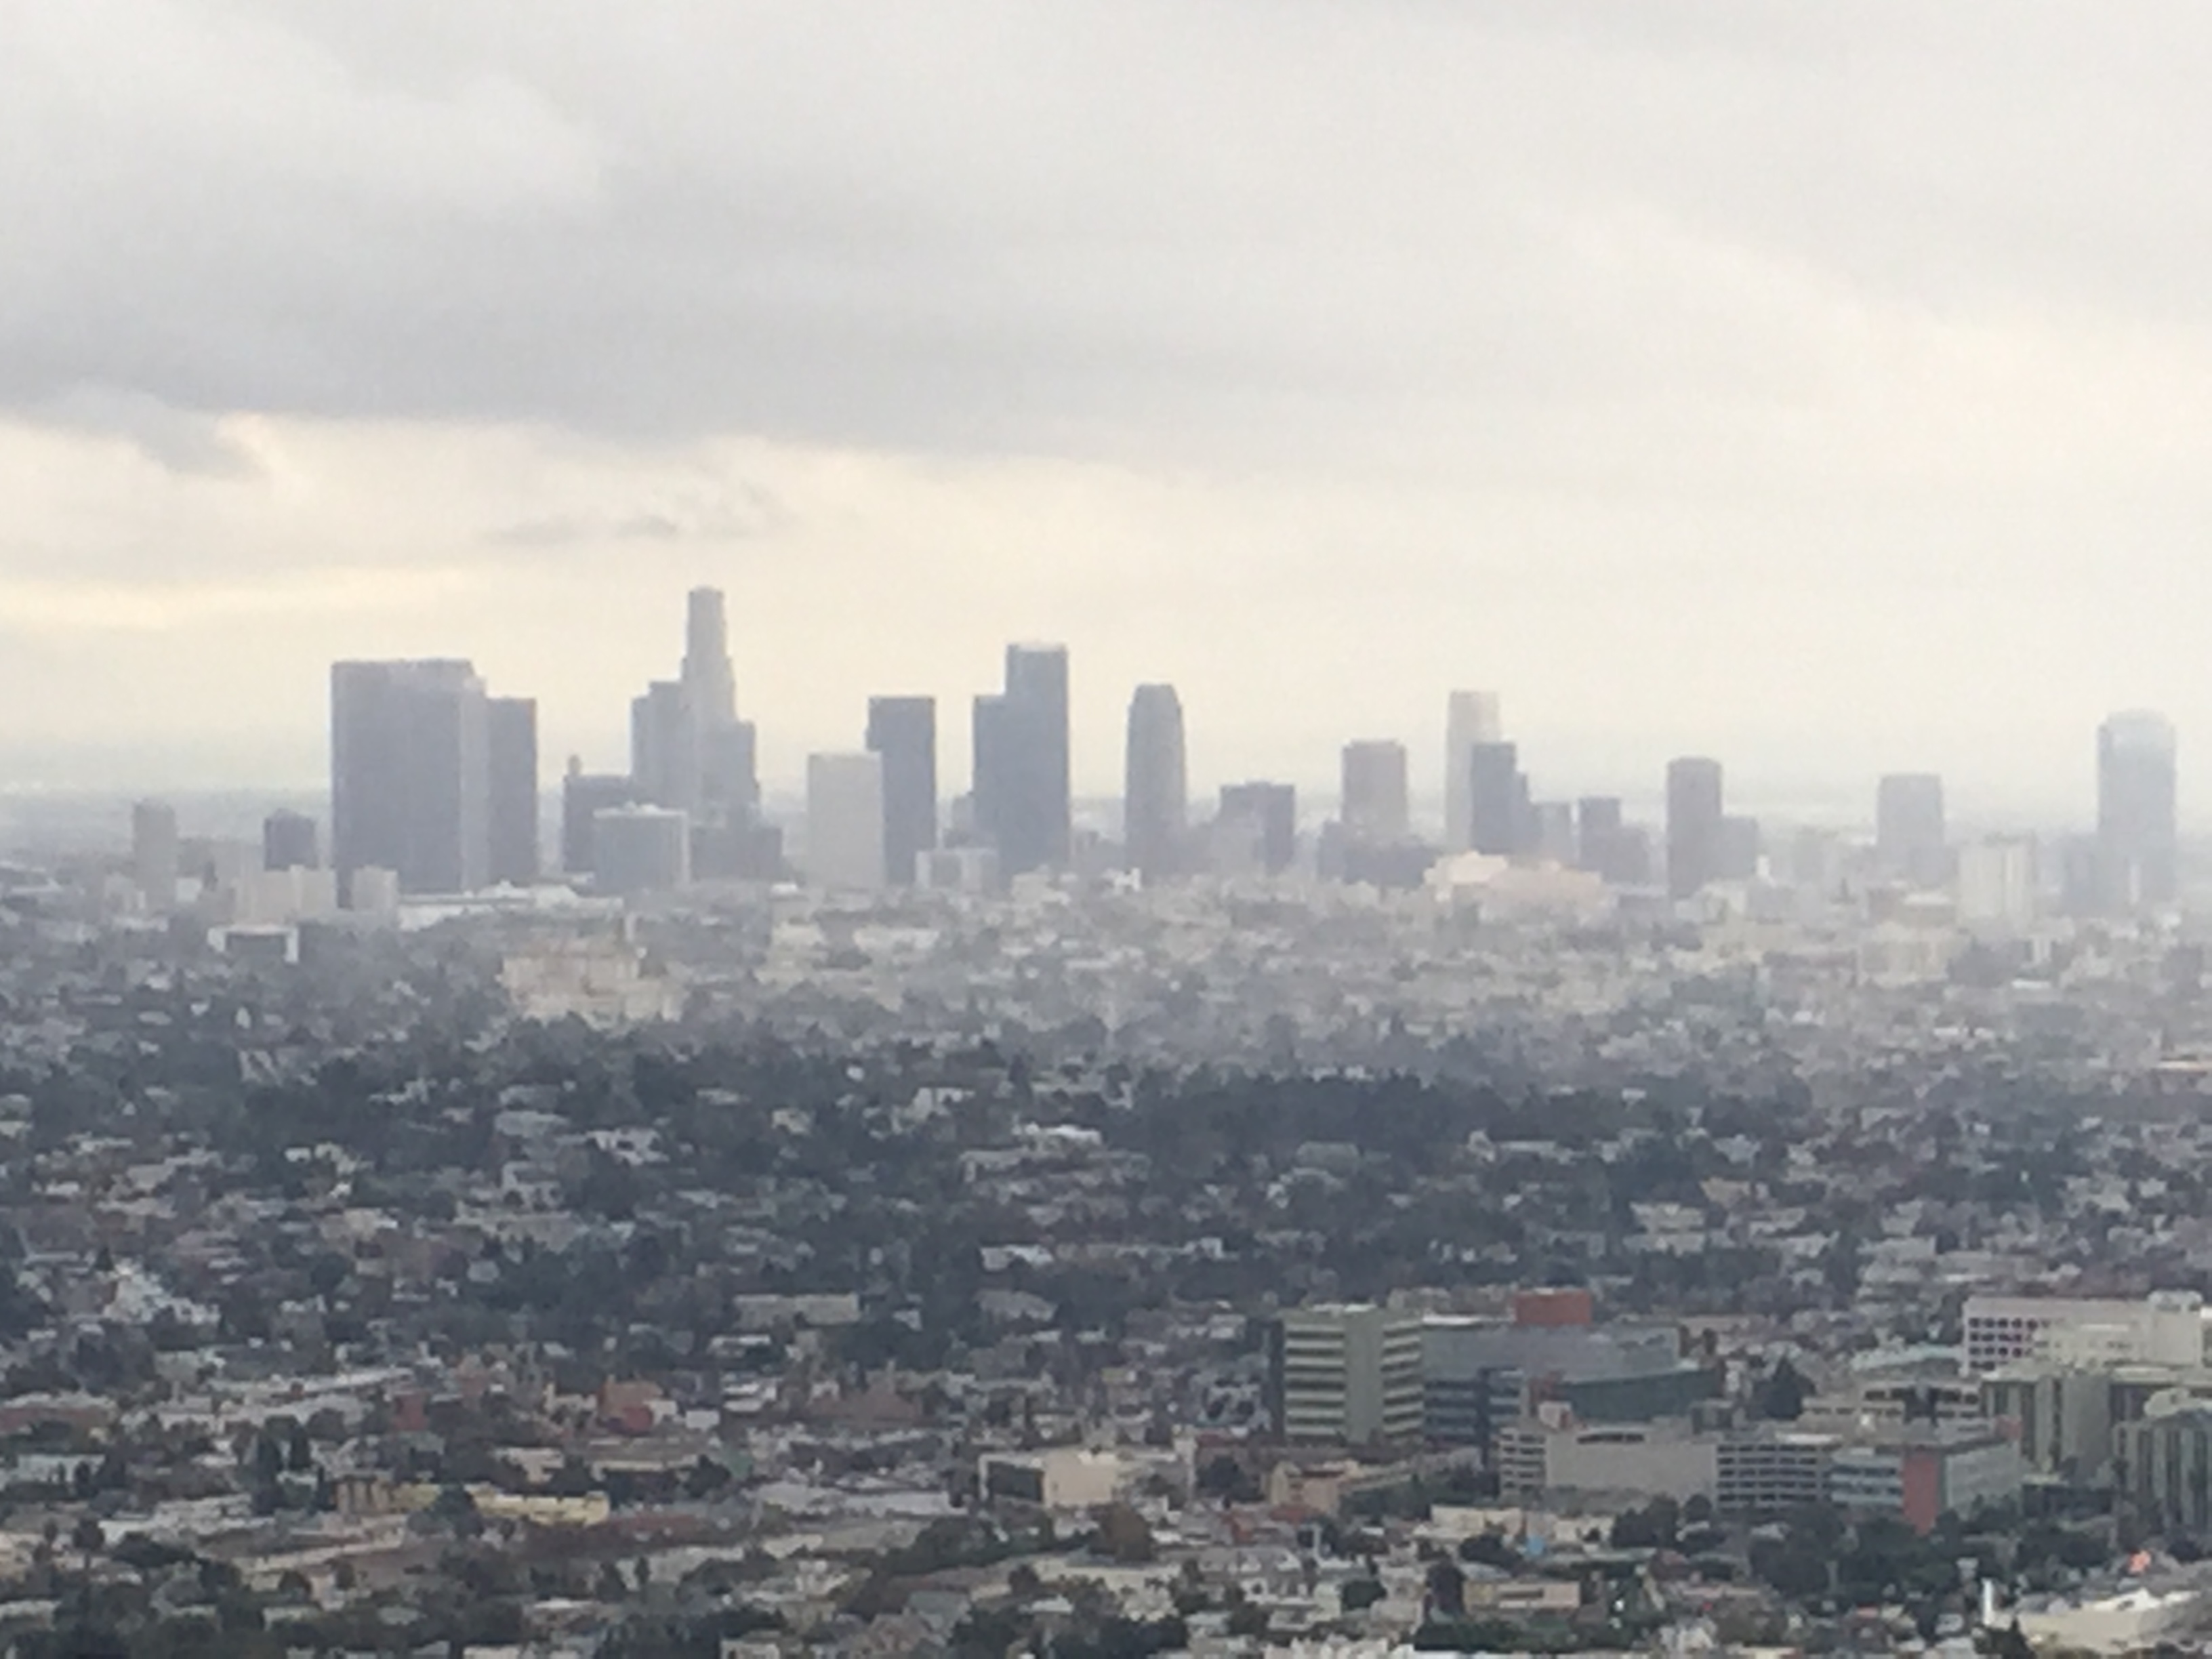 Downtown LA Skyline from Griffith Observatory.